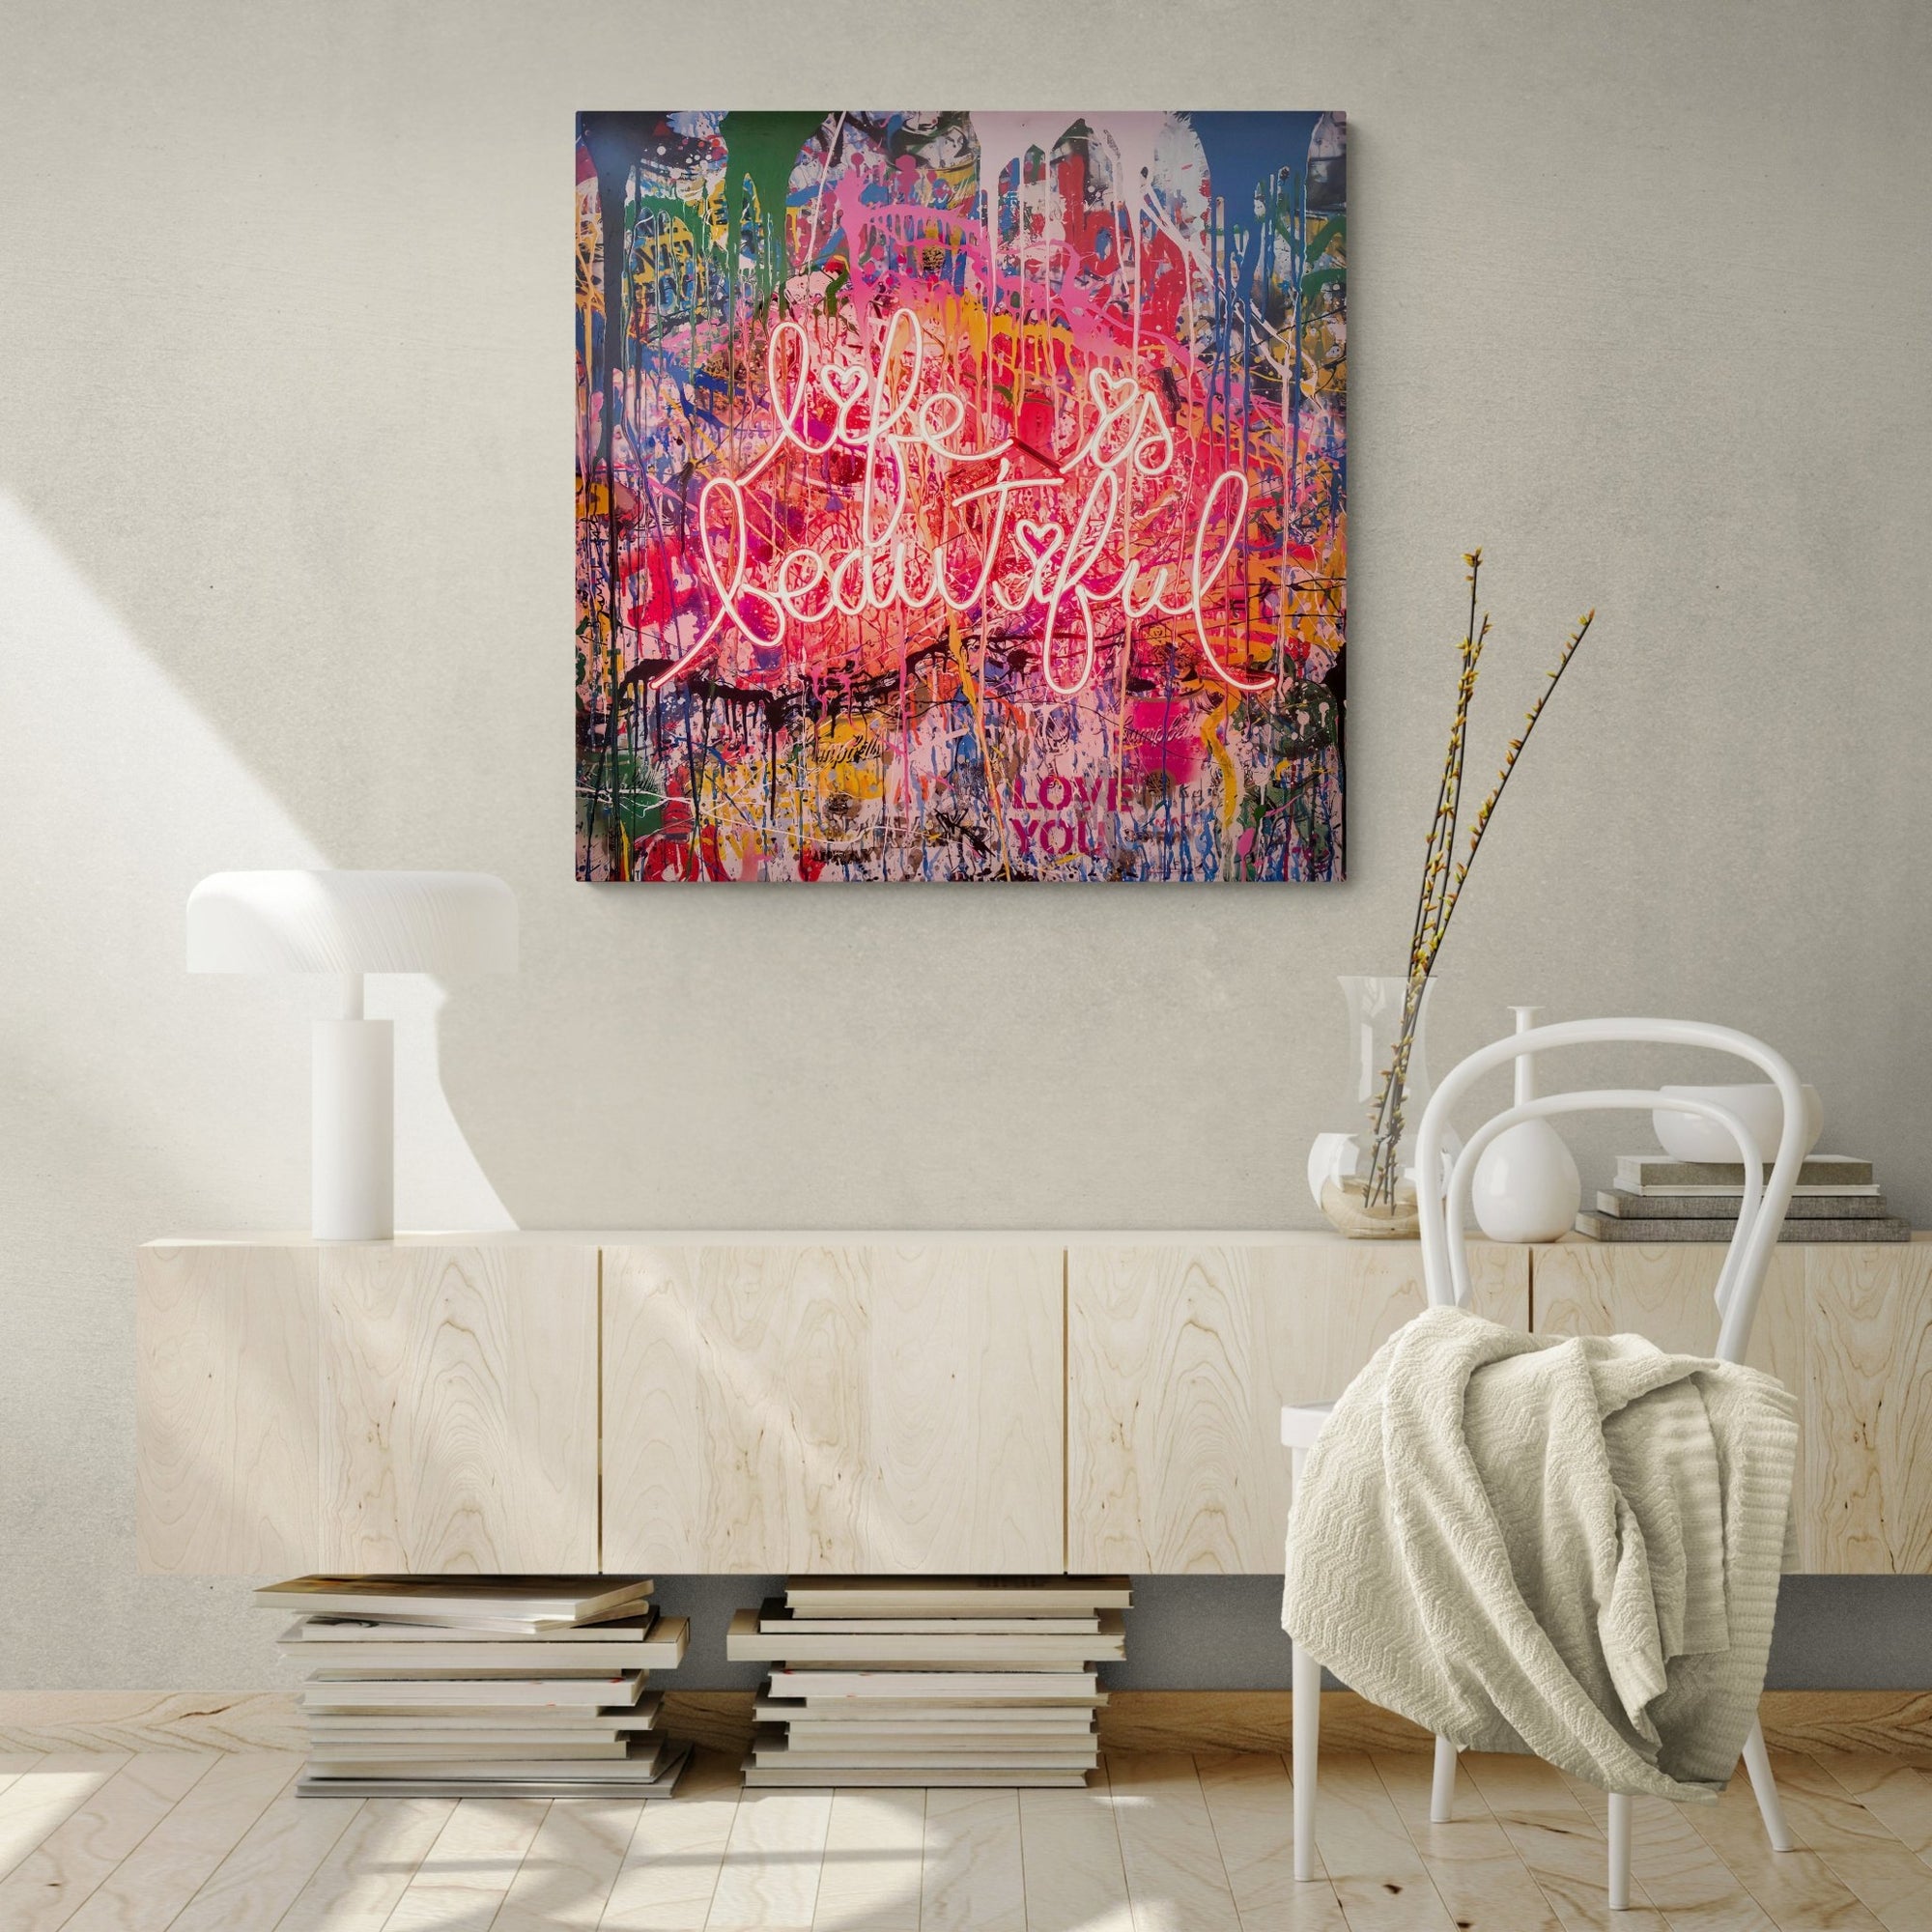 Why Say No to Large Canvas Wall Art?